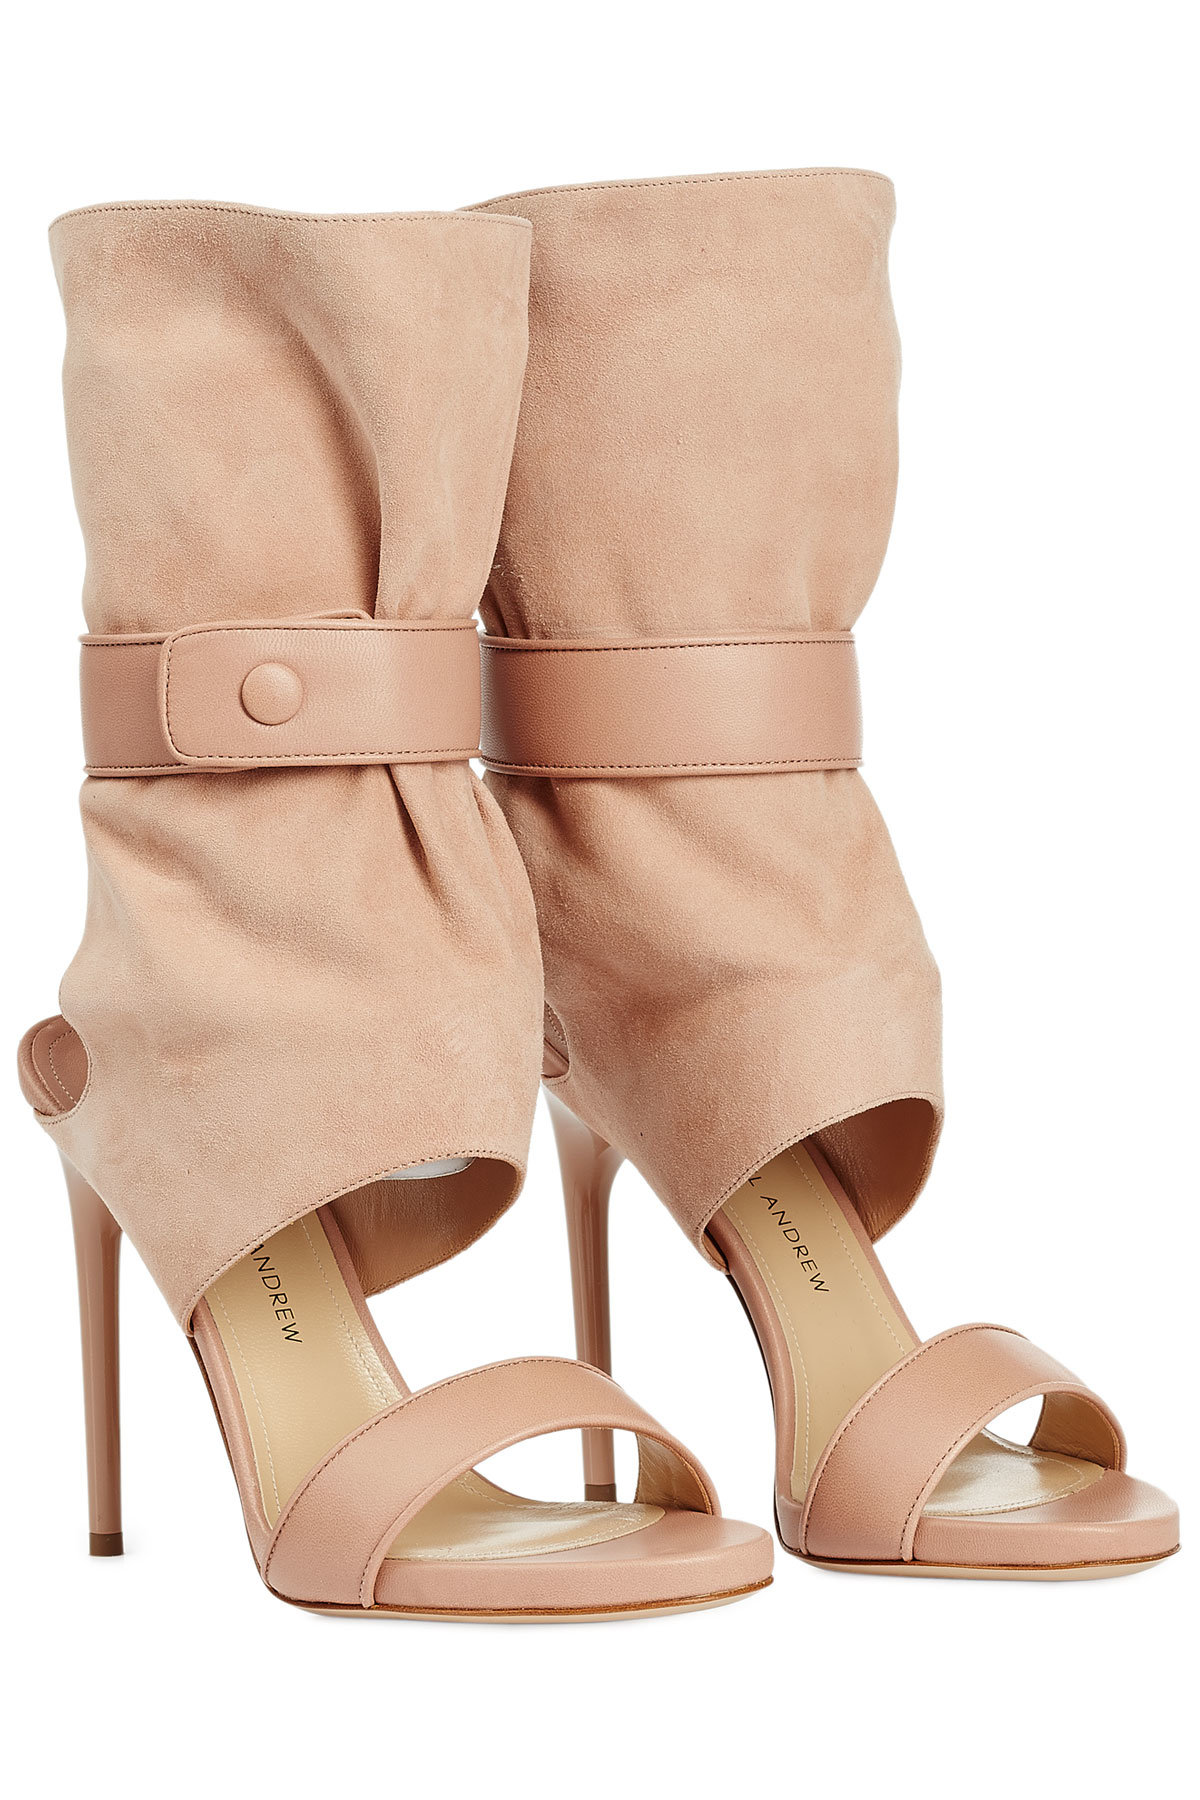 Paul Andrew - Leather and Suede Open-Toe Boots